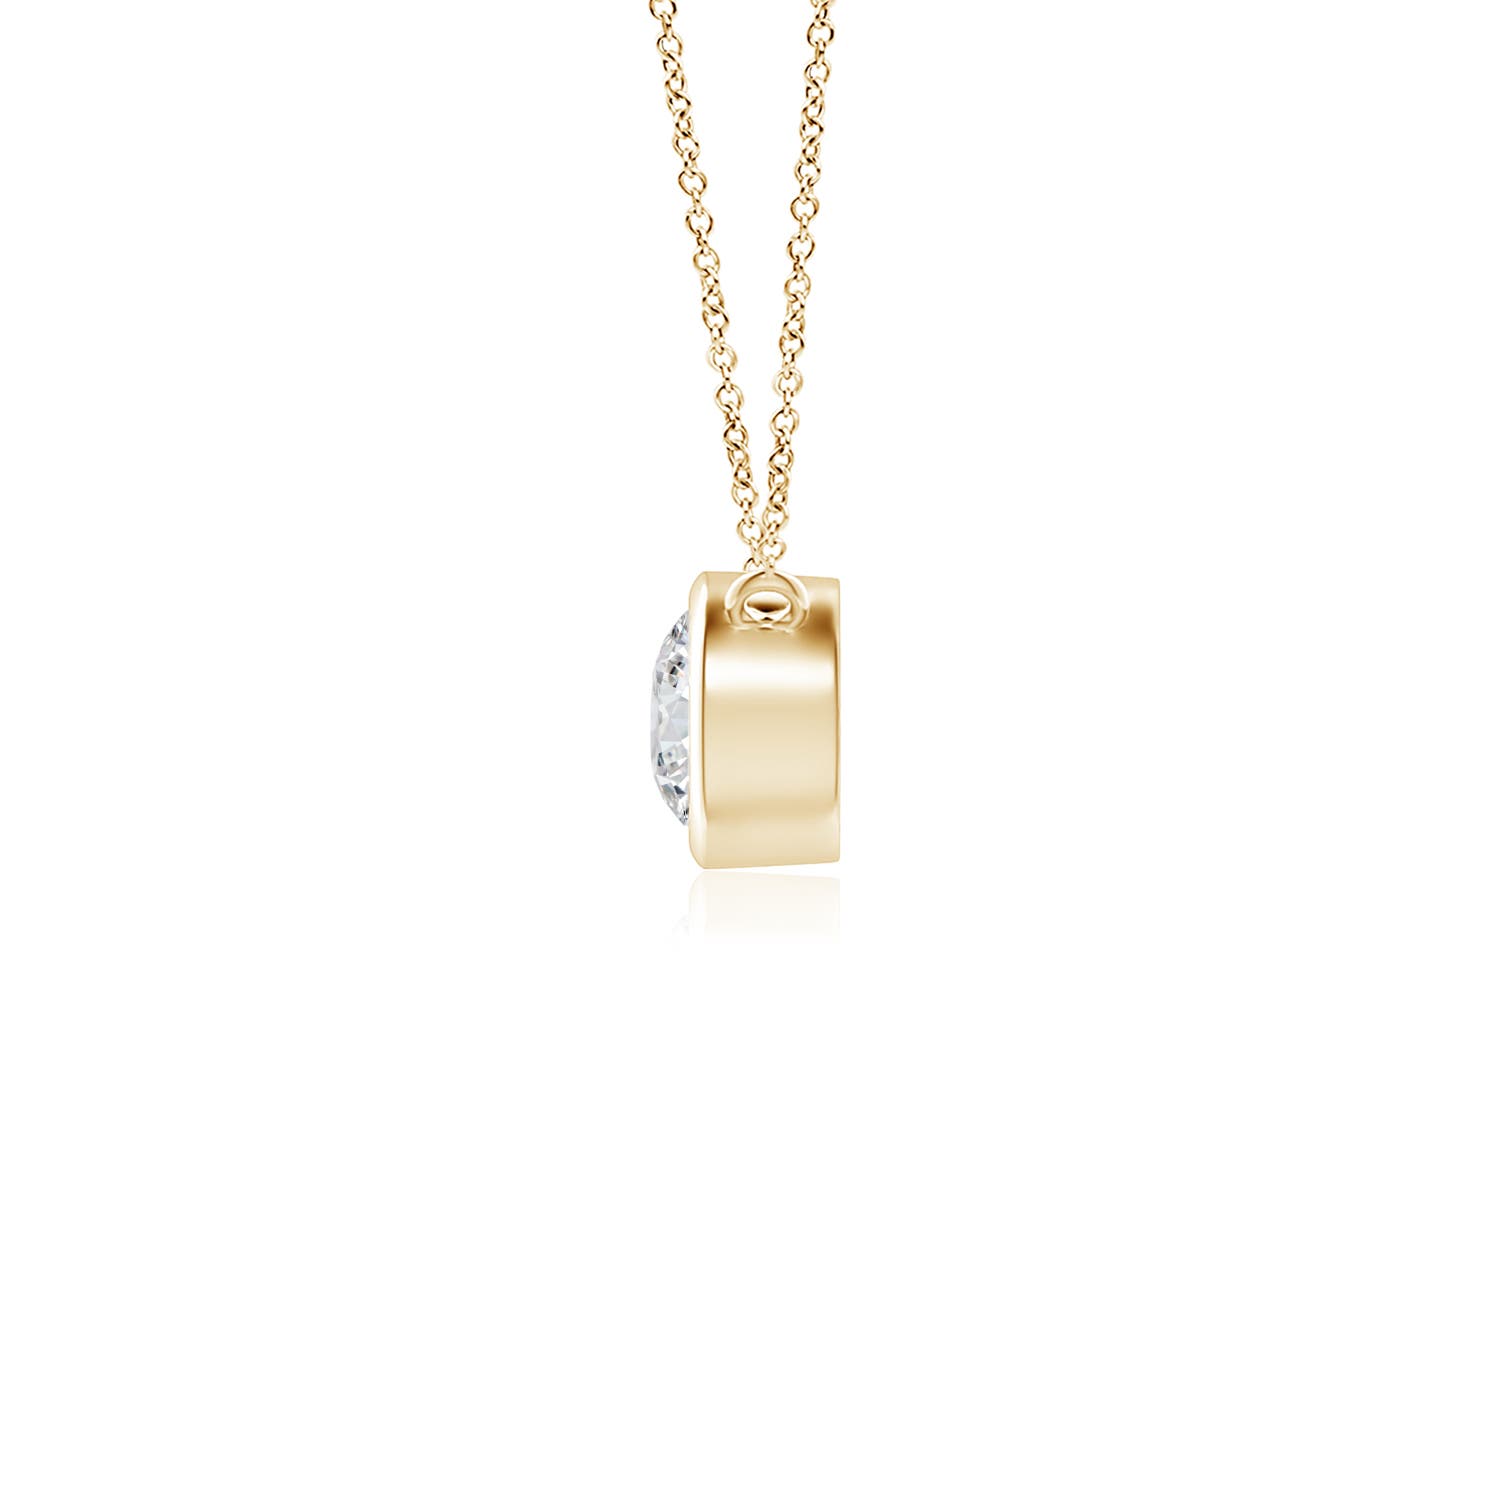 HSI2 / 0.11 CT / 14 KT Yellow Gold